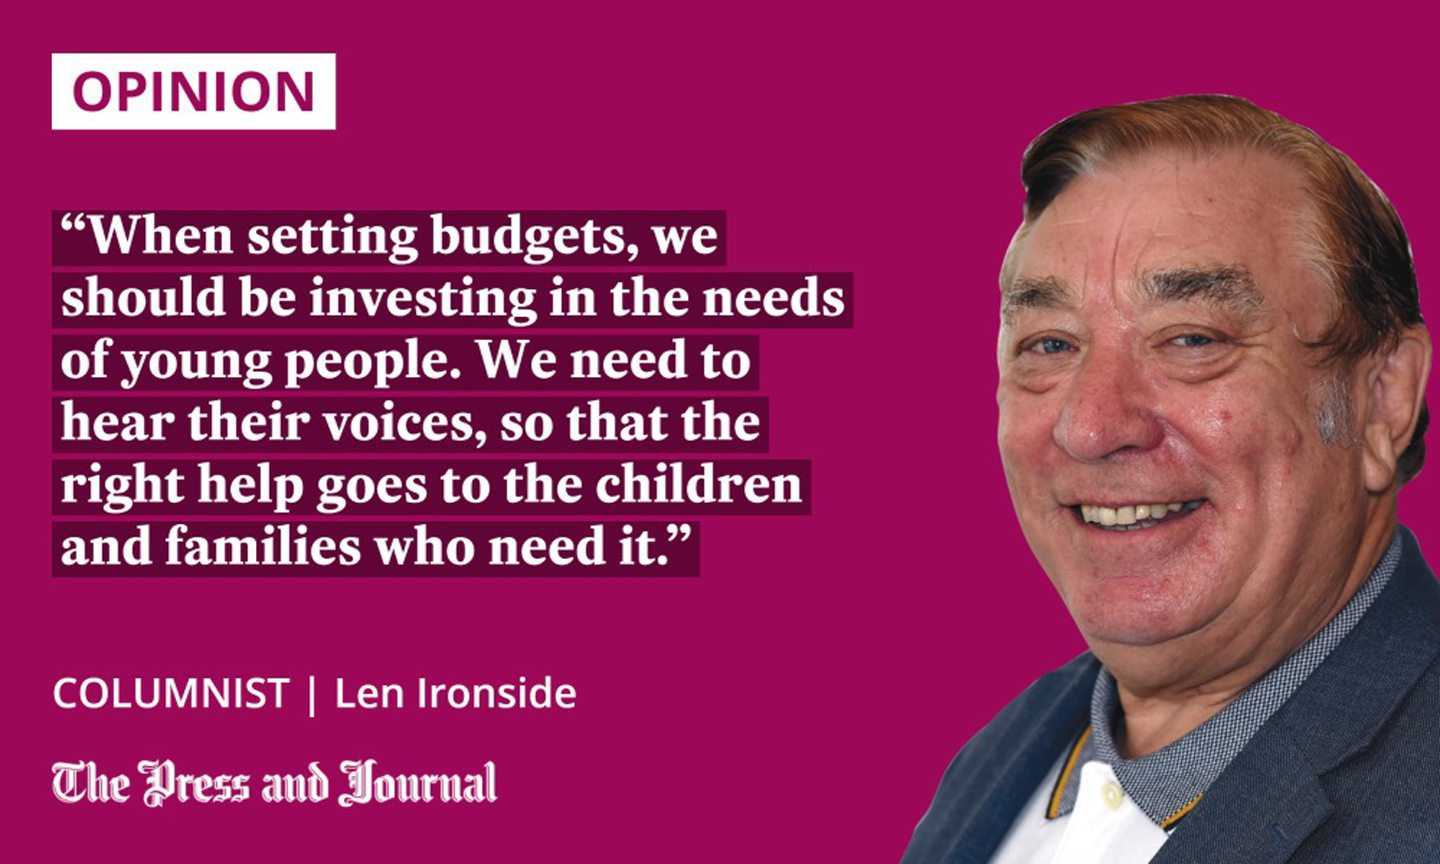 Quotation from columnist Len Ironside regarding antisocial behaviour in Scotland: "When setting budgets, we should be investing in the needs of young people. We need to hear their voices, so that the right help goes to the children and families who need it."